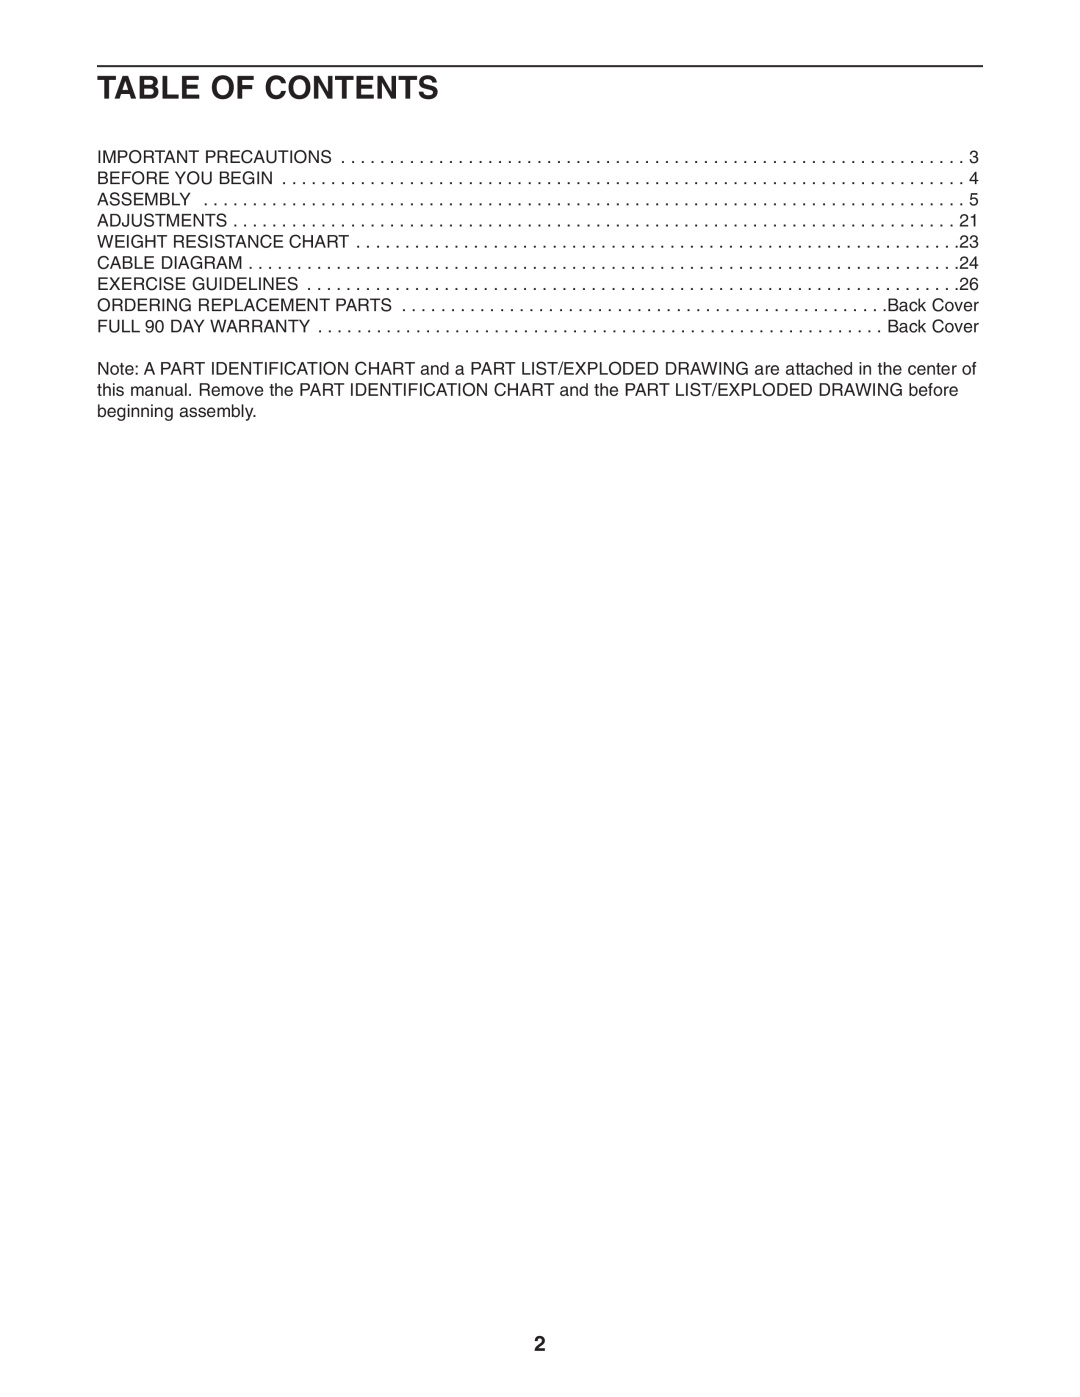 Weider 831.159822 user manual Table Of Contents 